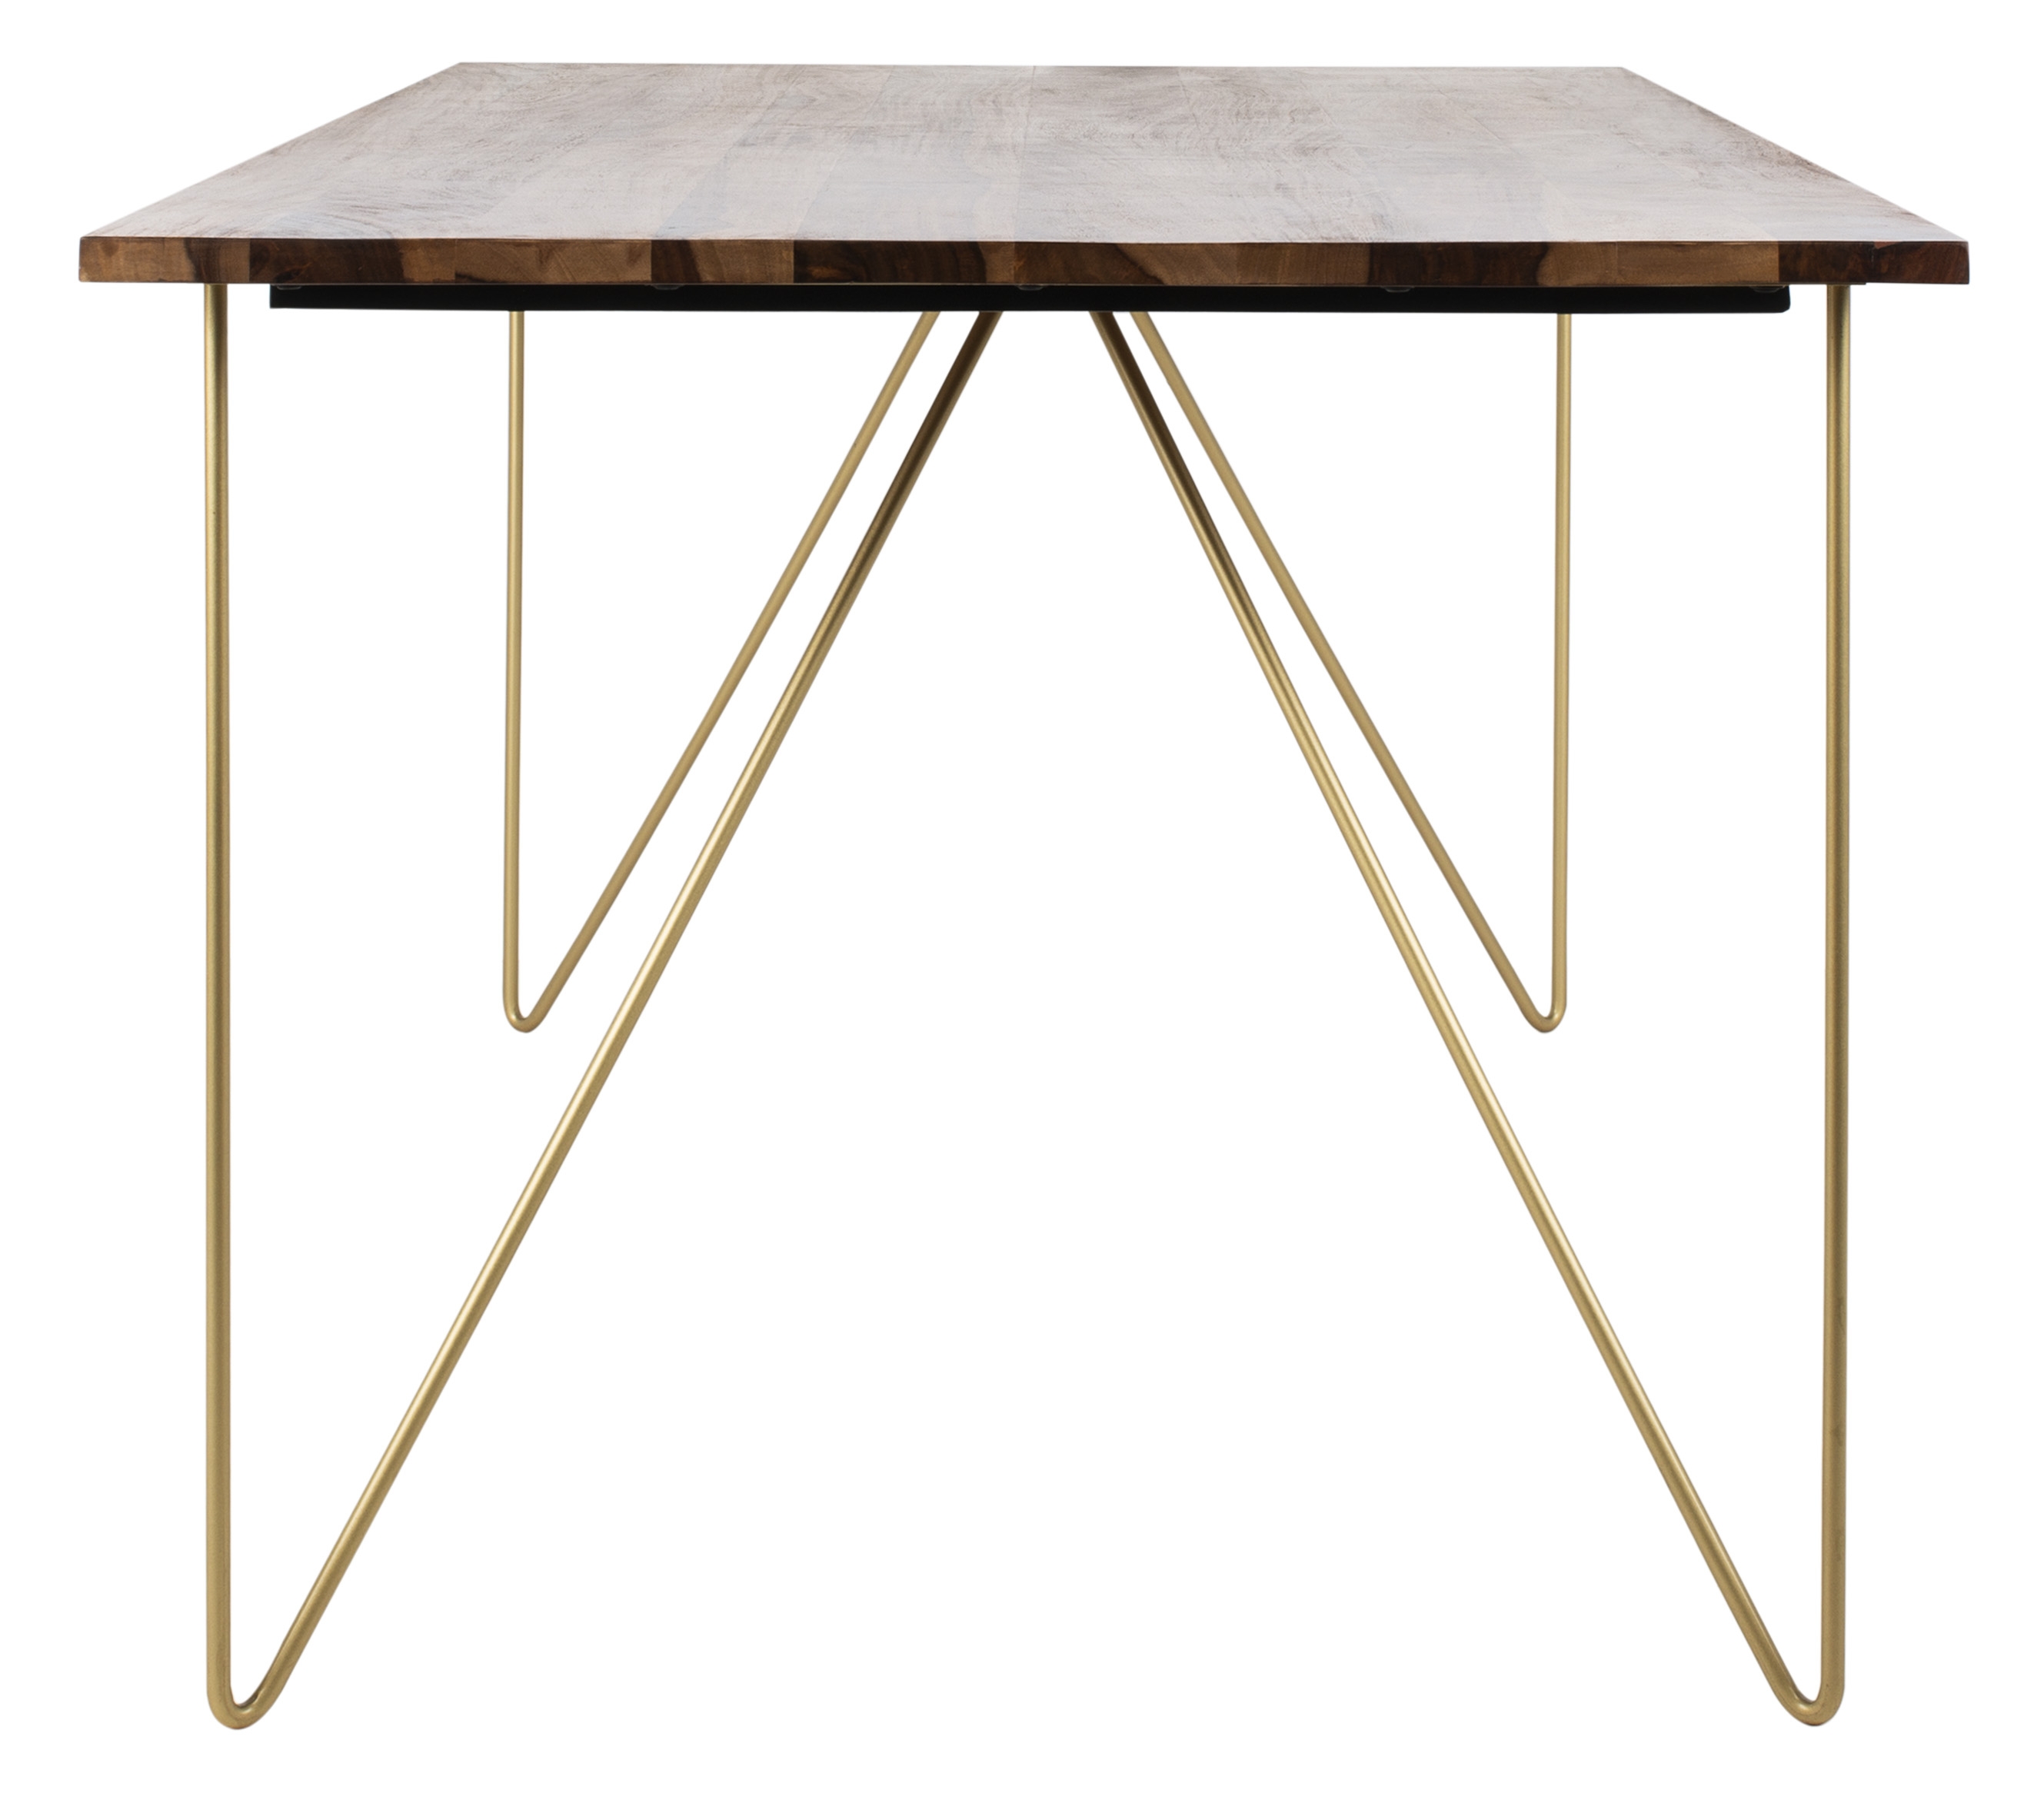 Captain Hairpin Legs Wood Dining Table - Walnut/Brass - Arlo Home - Image 2